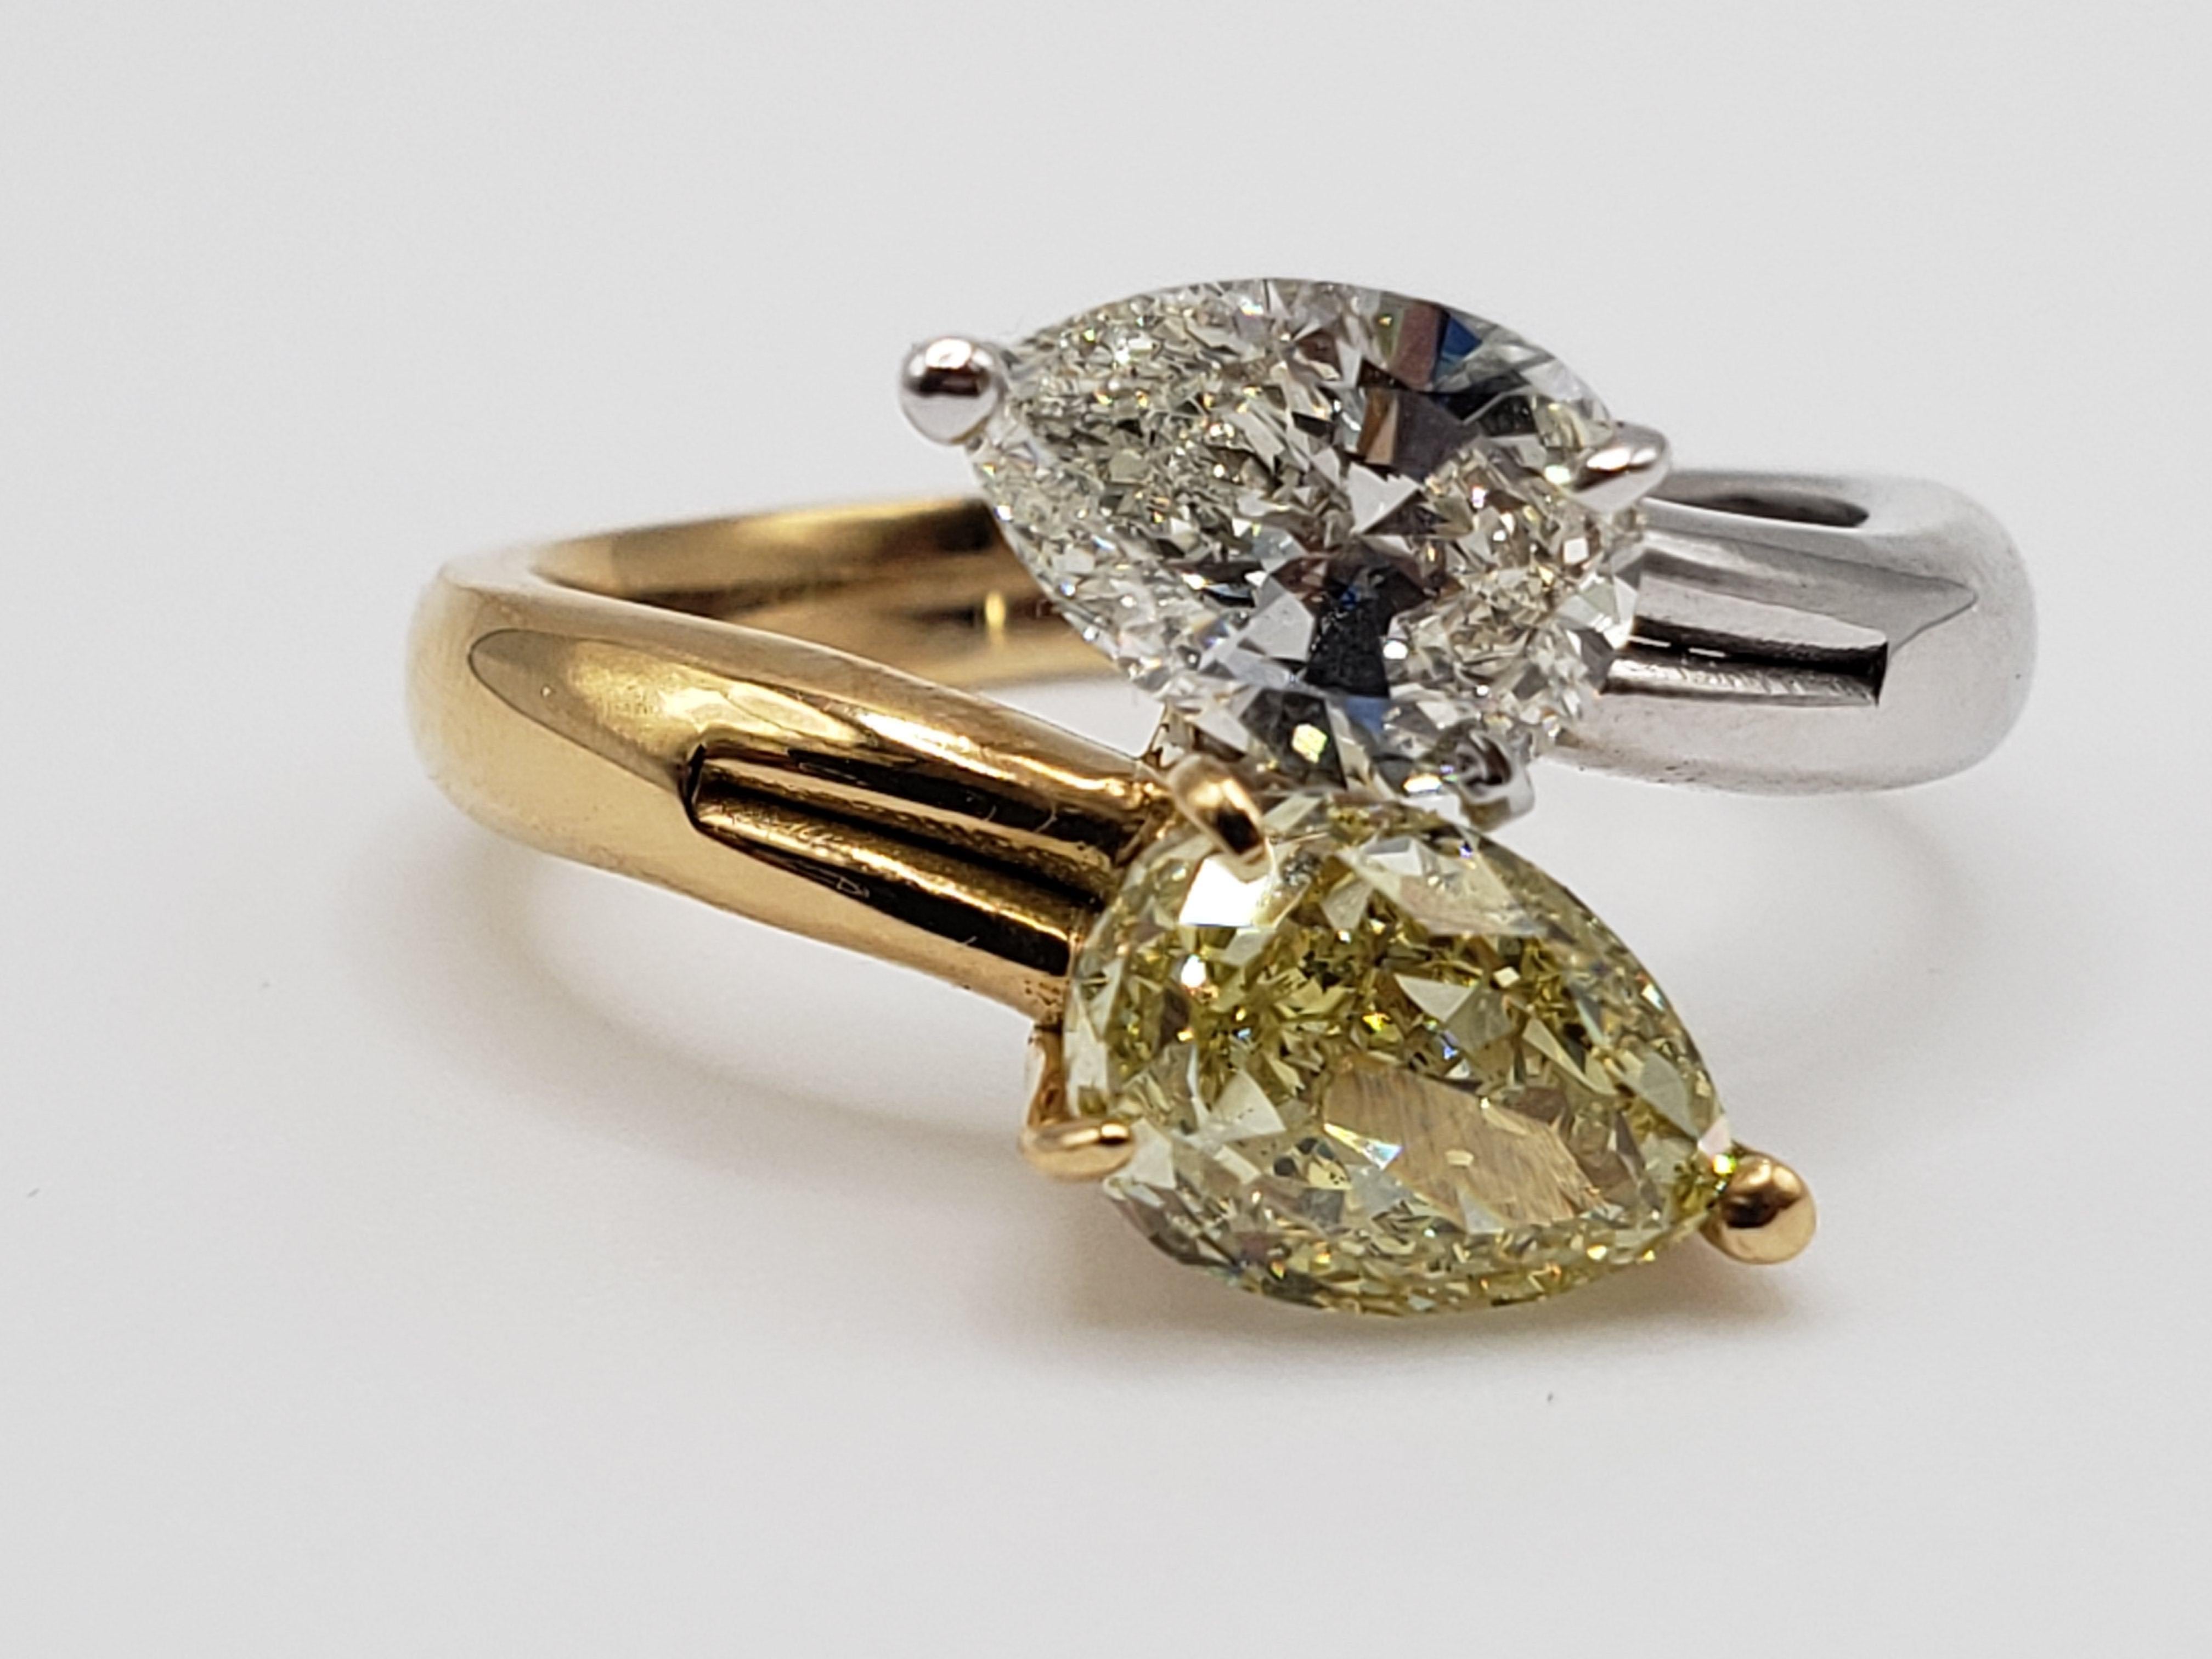 An extraordinary handmade diamond ring crafted from 14K two-tone (white and yellow) gold. It features two individual teardrop/pear-shaped natural diamonds. The GIA-certified natural fancy yellow diamond weighs 1.52 carats, exhibits even color